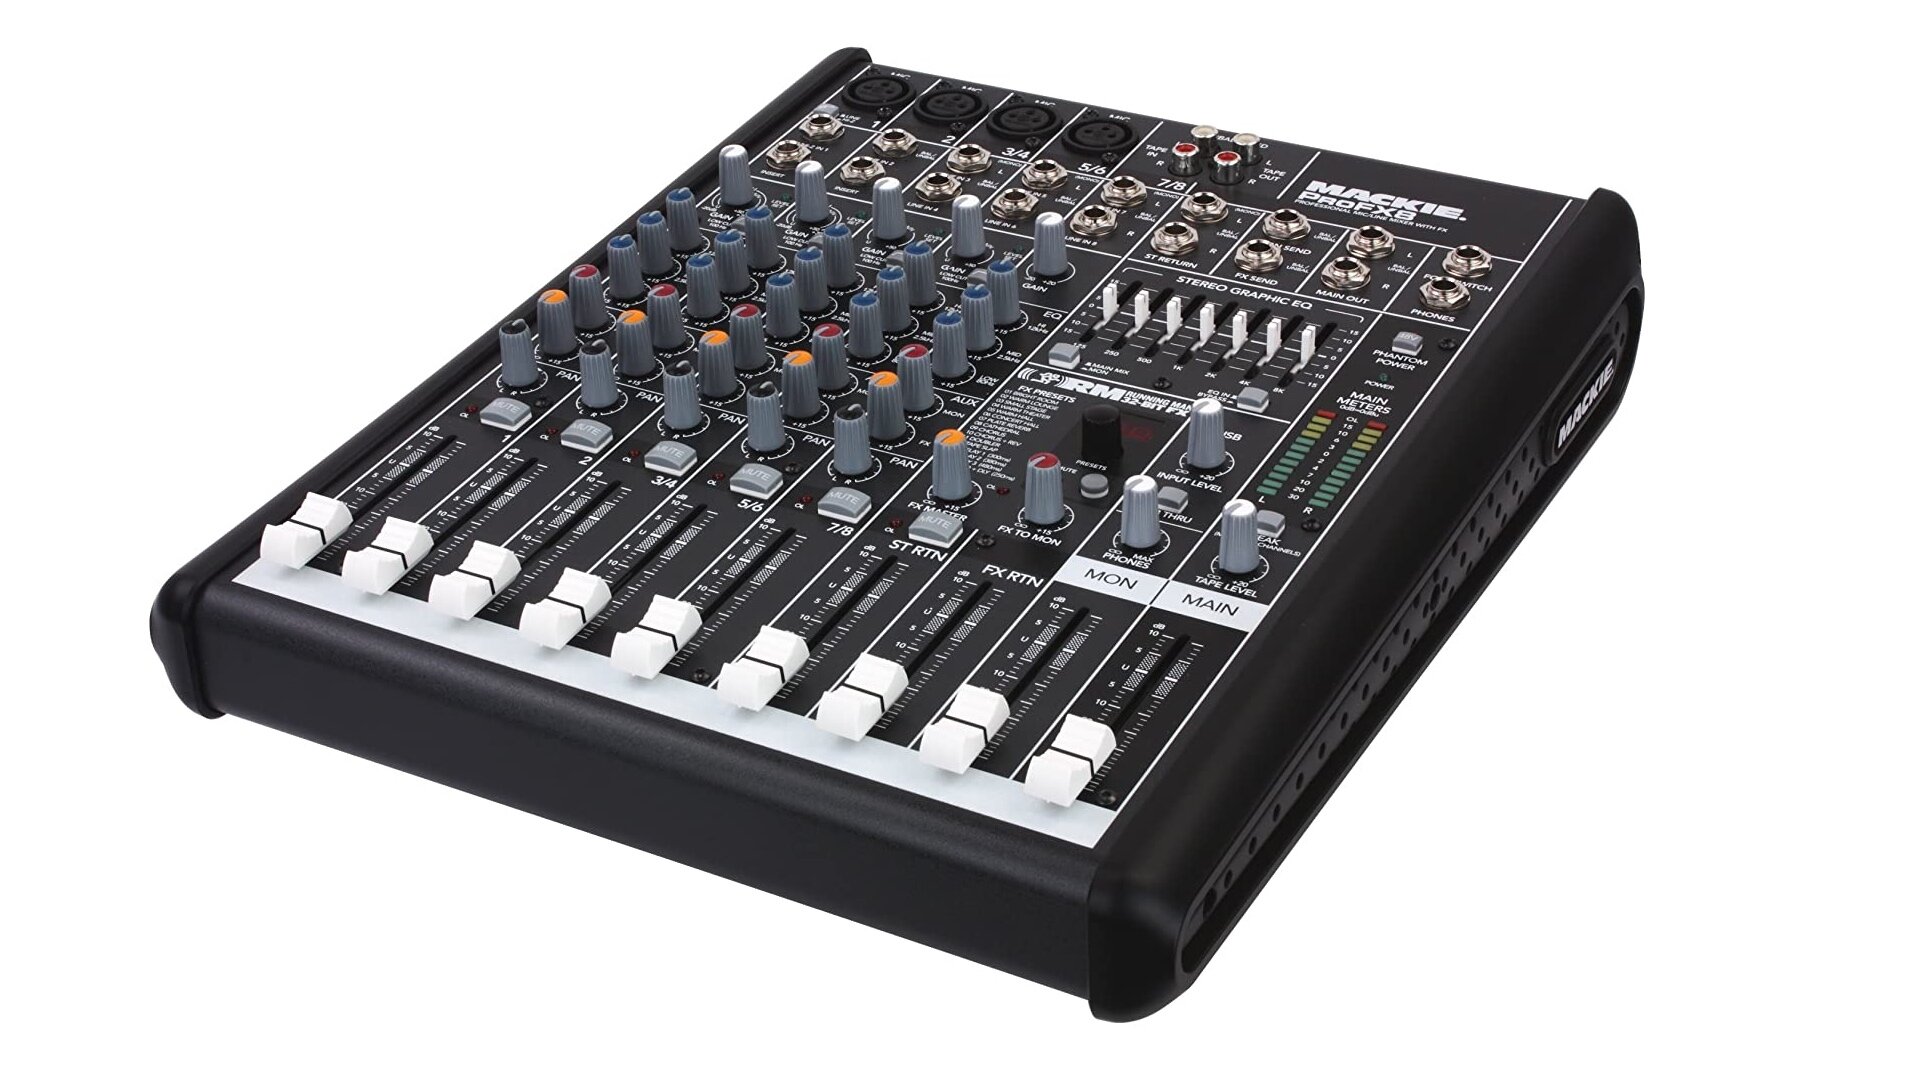 Mackie Profx8 mixer for hire 3.jpg